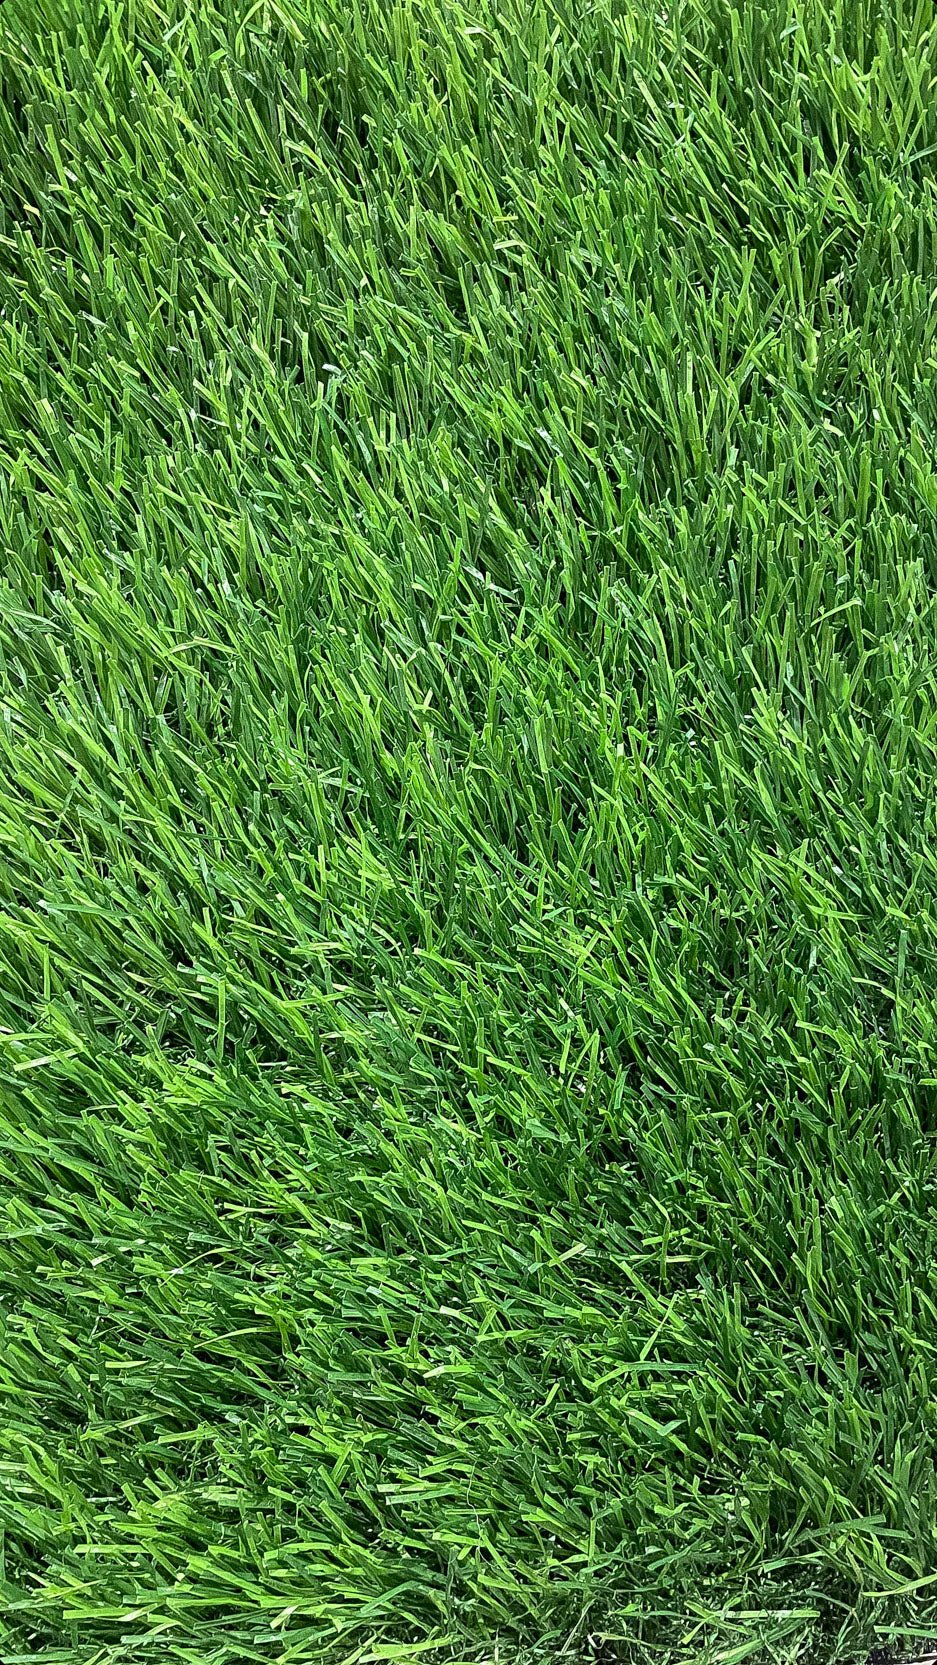 50 MM Frankfurt Artificial Grass for Indoor and Outdoor Use, Soft and Lush Natural Looking - V Surfaces